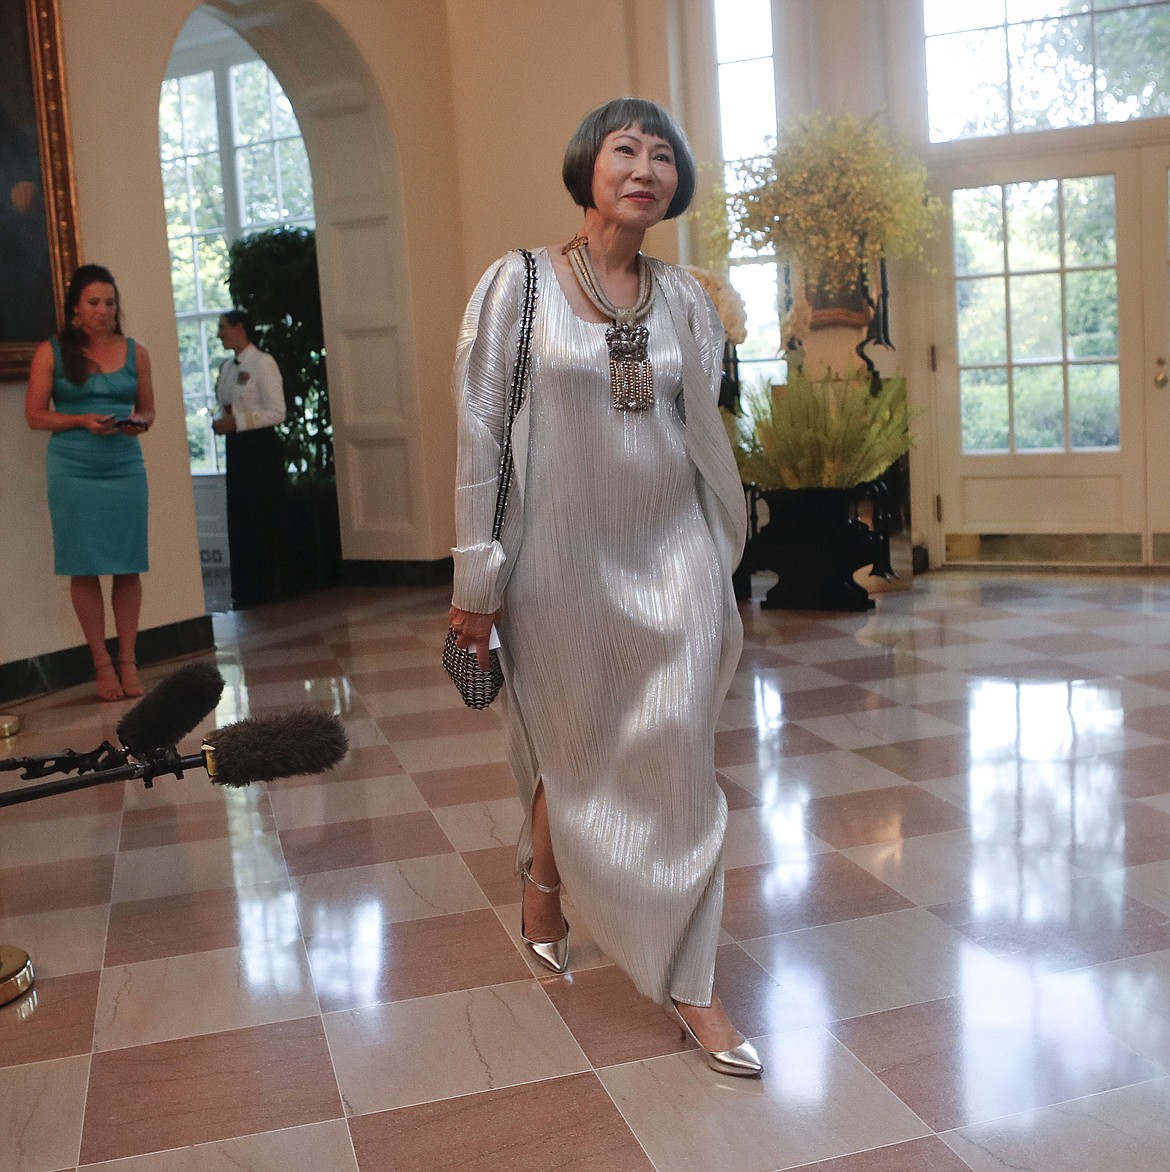 Author Amy Tan arrives for the State Dinner for Singapore Prime Minister Lee Hsien Loong, at the White House in Washington, on Aug. 2, 2016. Tan’s contributions to the arts and other aspects of her life are part of a film series hosted by the Moses Lake Museum and Art Center in March.